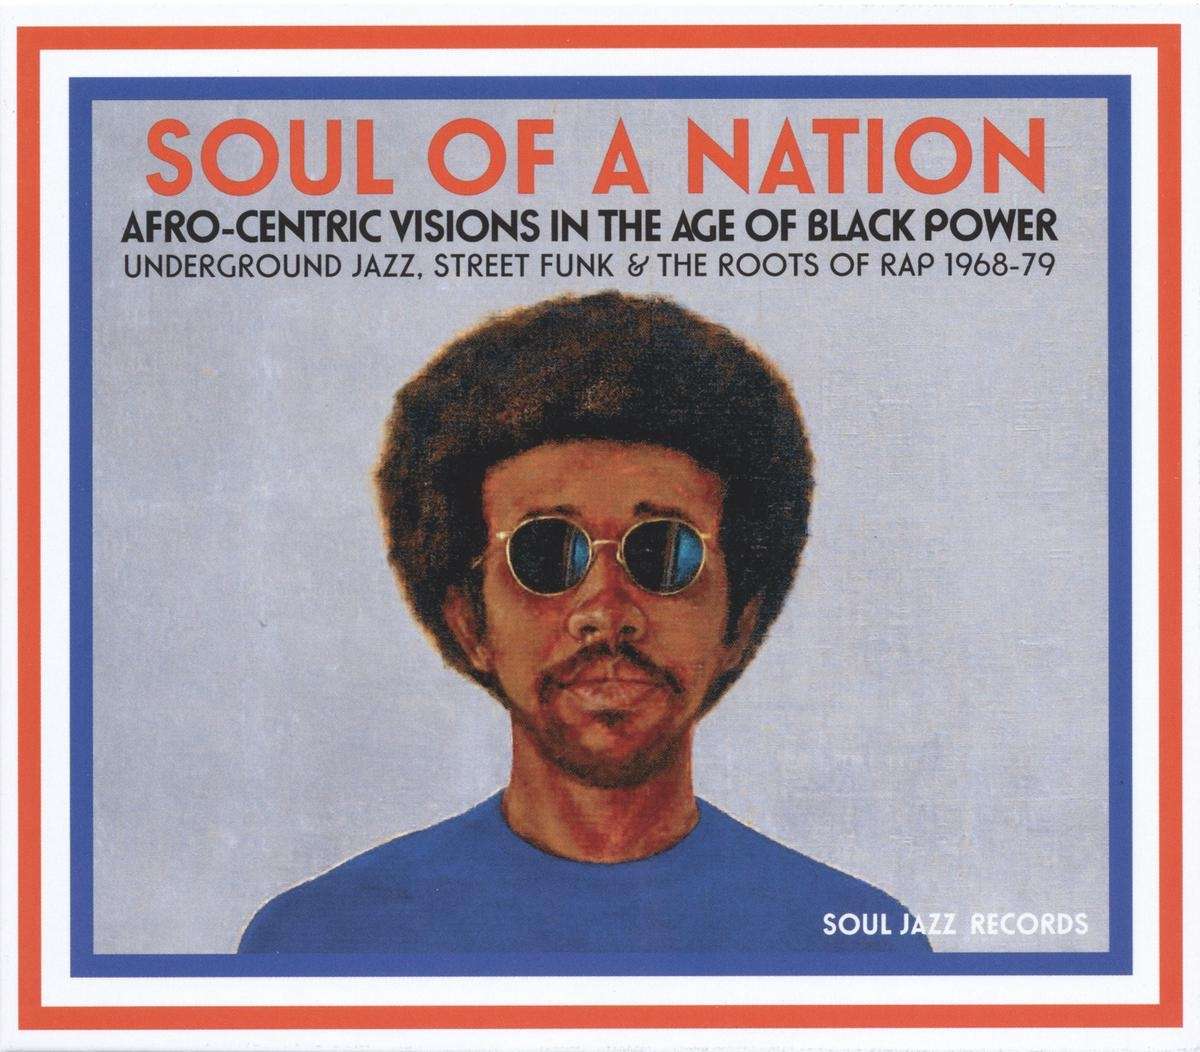 Soul Of A Nation: Afro-Centric Visions In The Age Of Black Power - 33RPM